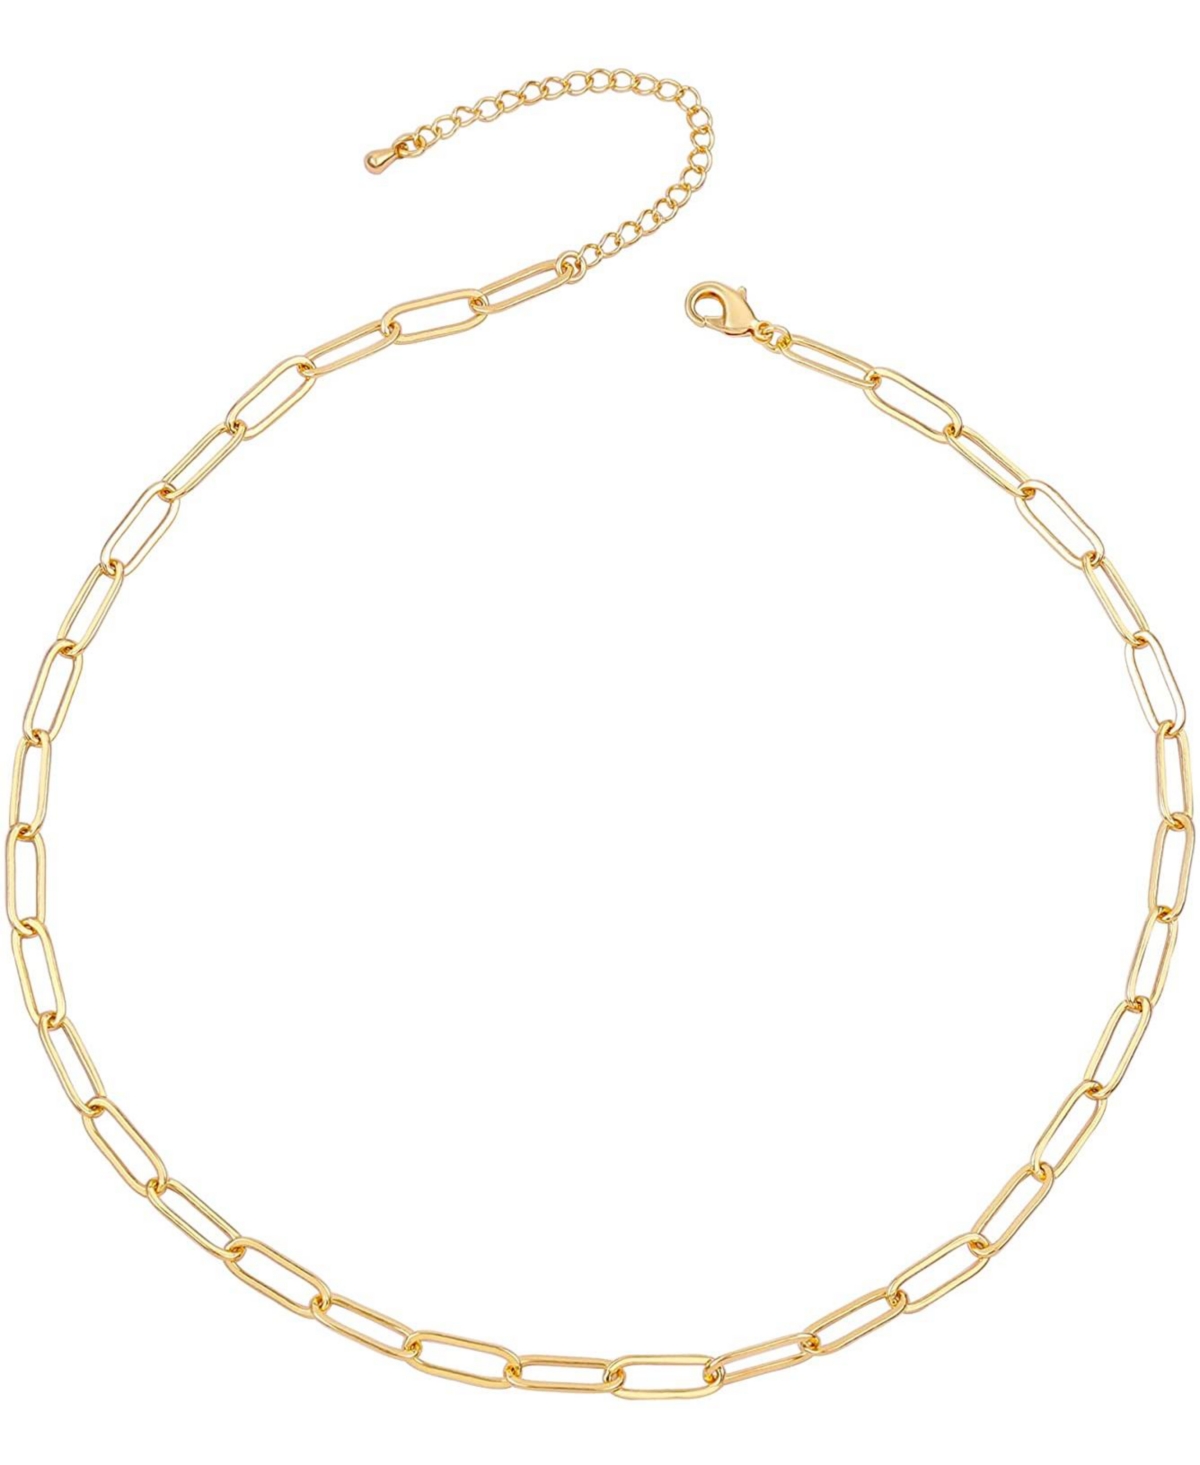 Stylish Teens/Young Adults 14k Gold Plated Cable Link Chain Adjustable Necklace - Gold